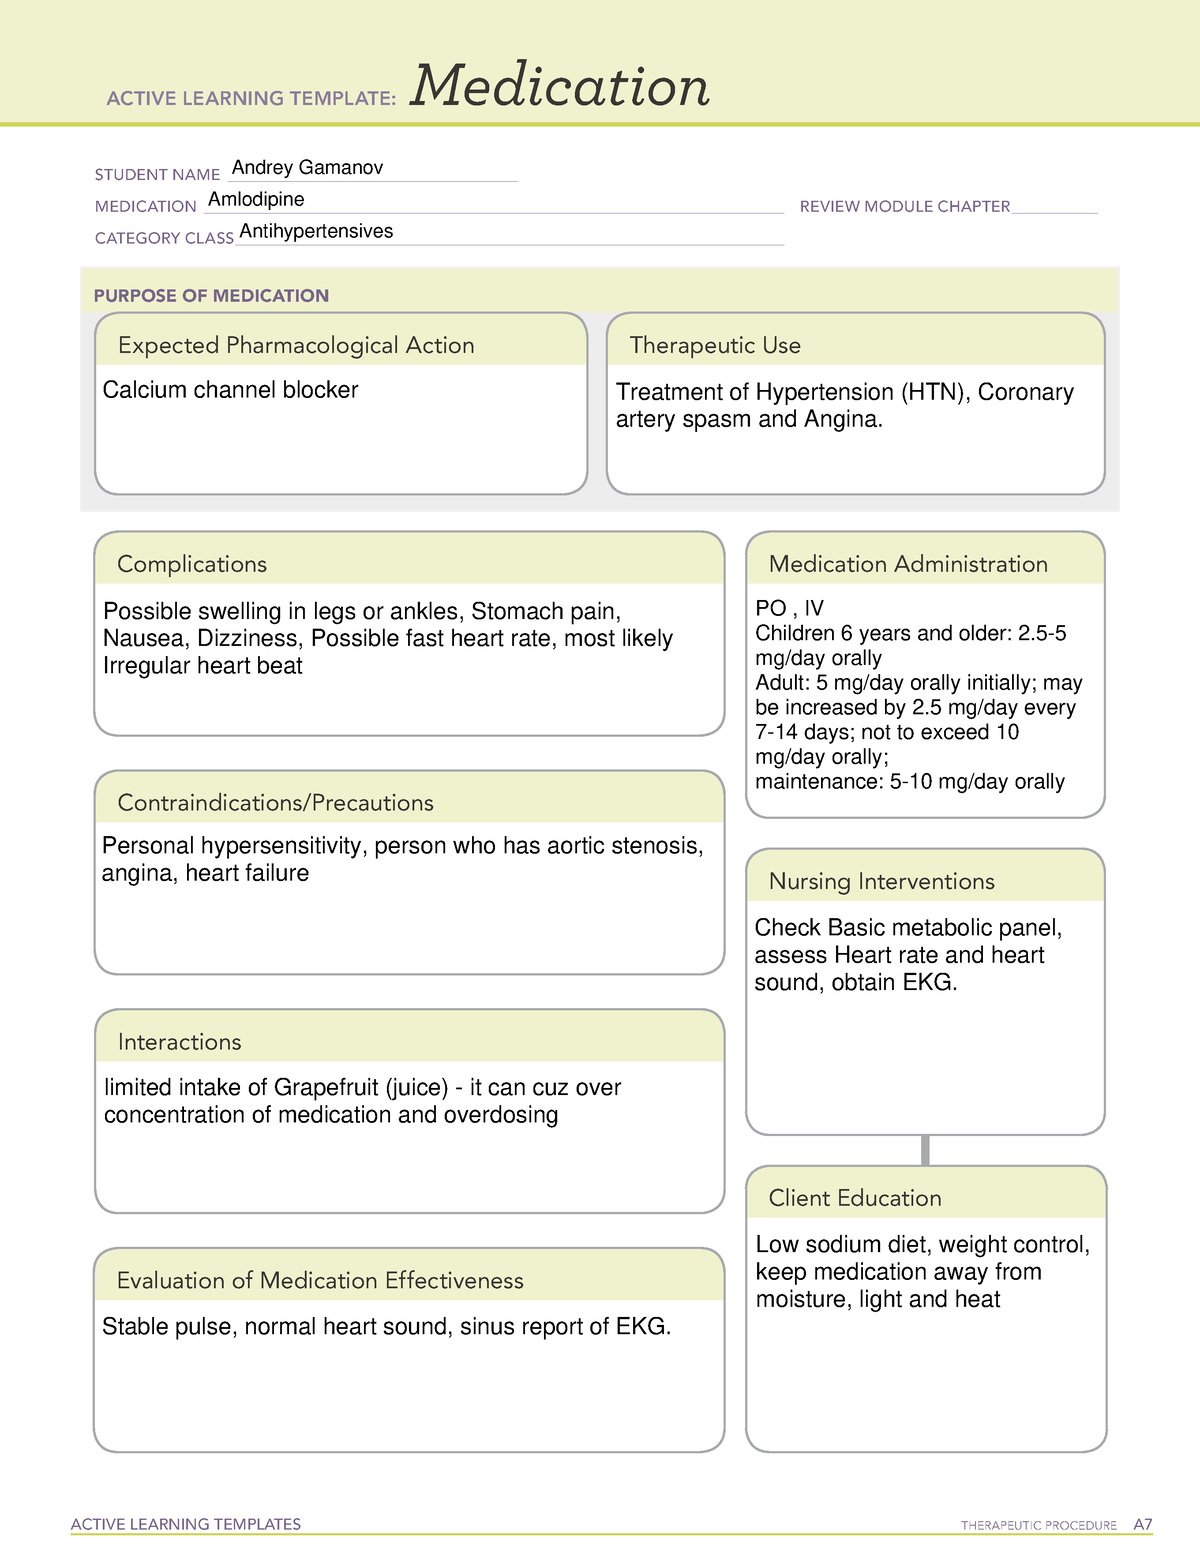 Amlodipine medication ACTIVE LEARNING TEMPLATES THERAPEUTIC